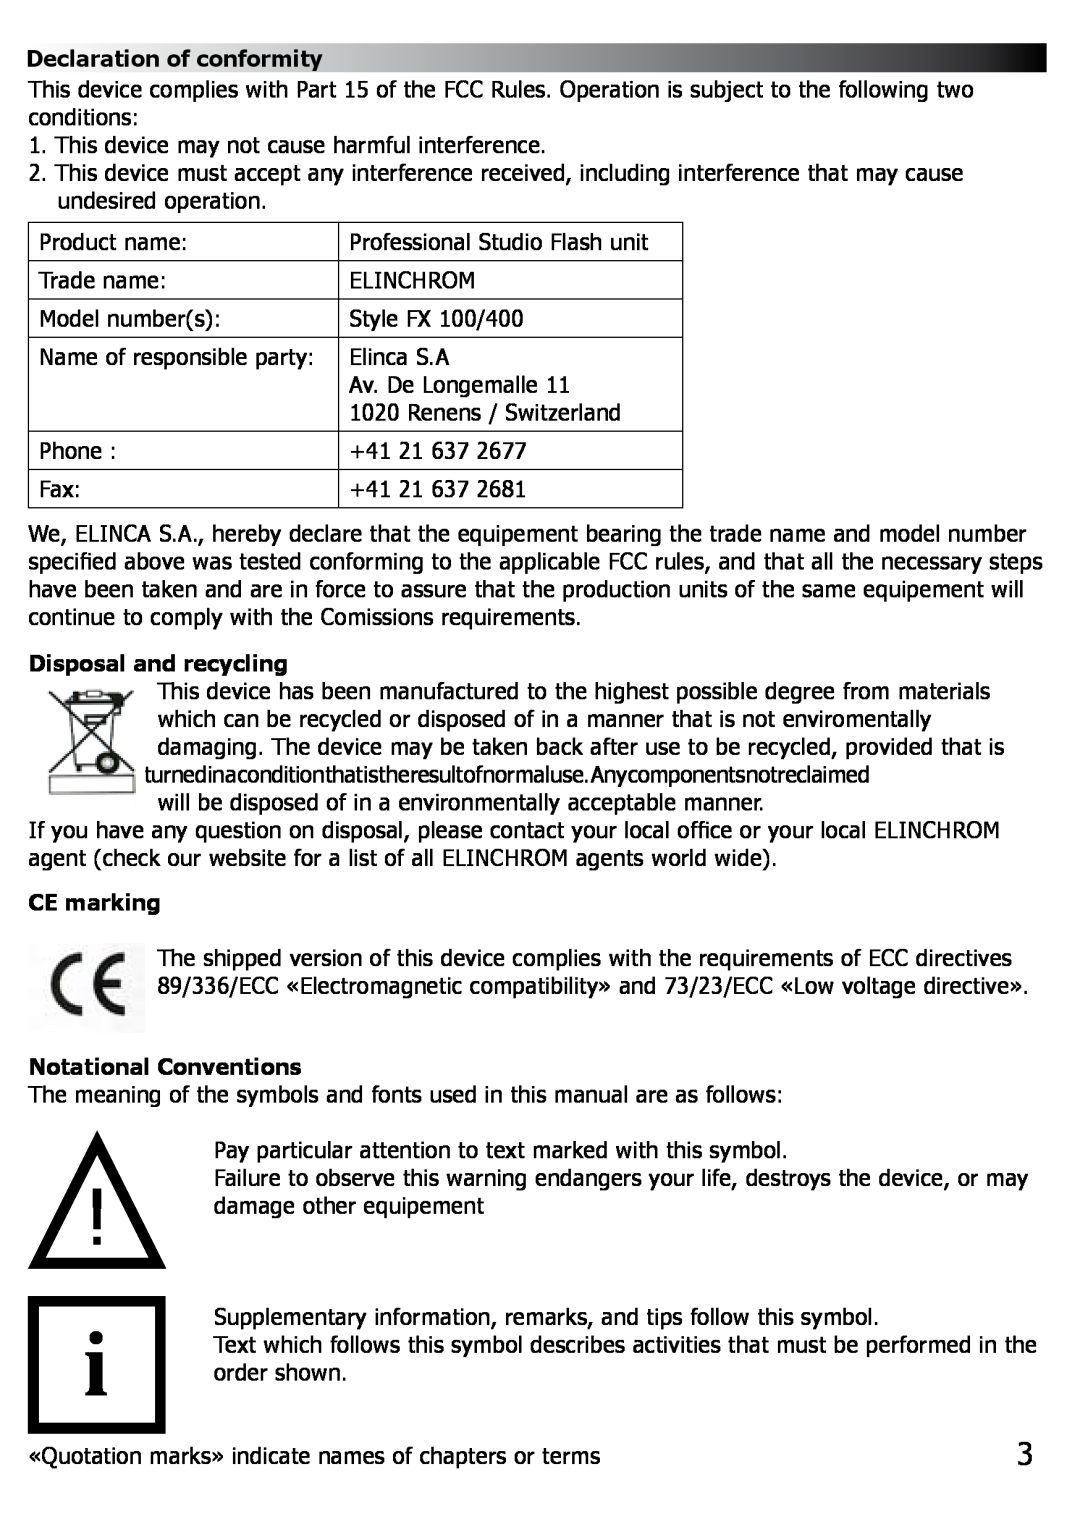 Elinca FX 100, FX 400 manual Declaration of conformity, Disposal and recycling, CE marking, Notational Conventions 